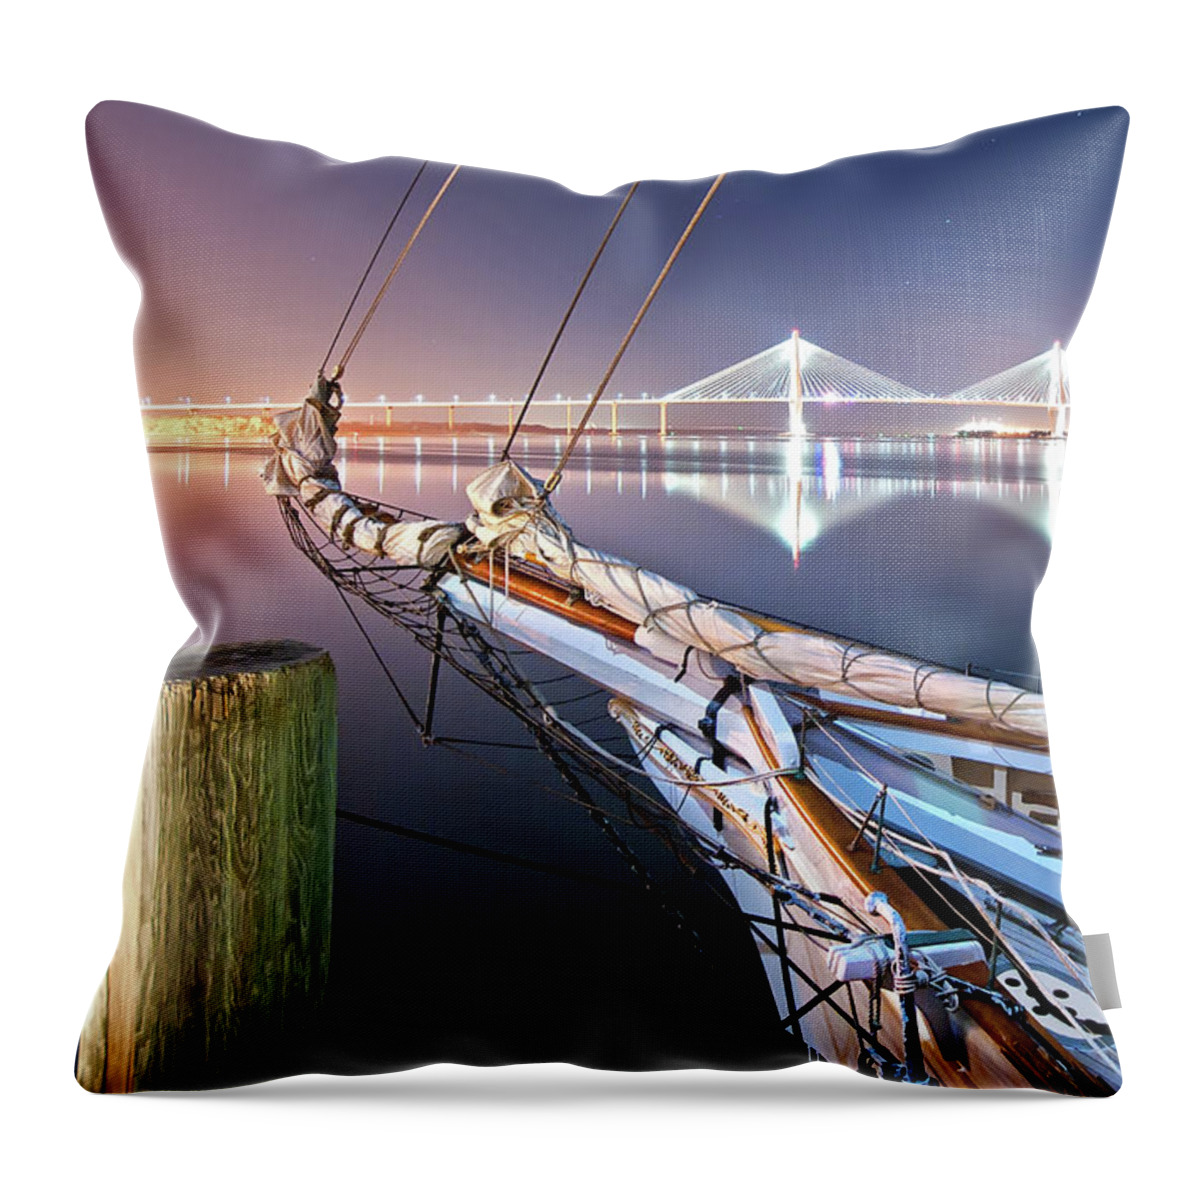 Tranquility Throw Pillow featuring the photograph Charleston Harbor by Sky Noir Photography By Bill Dickinson